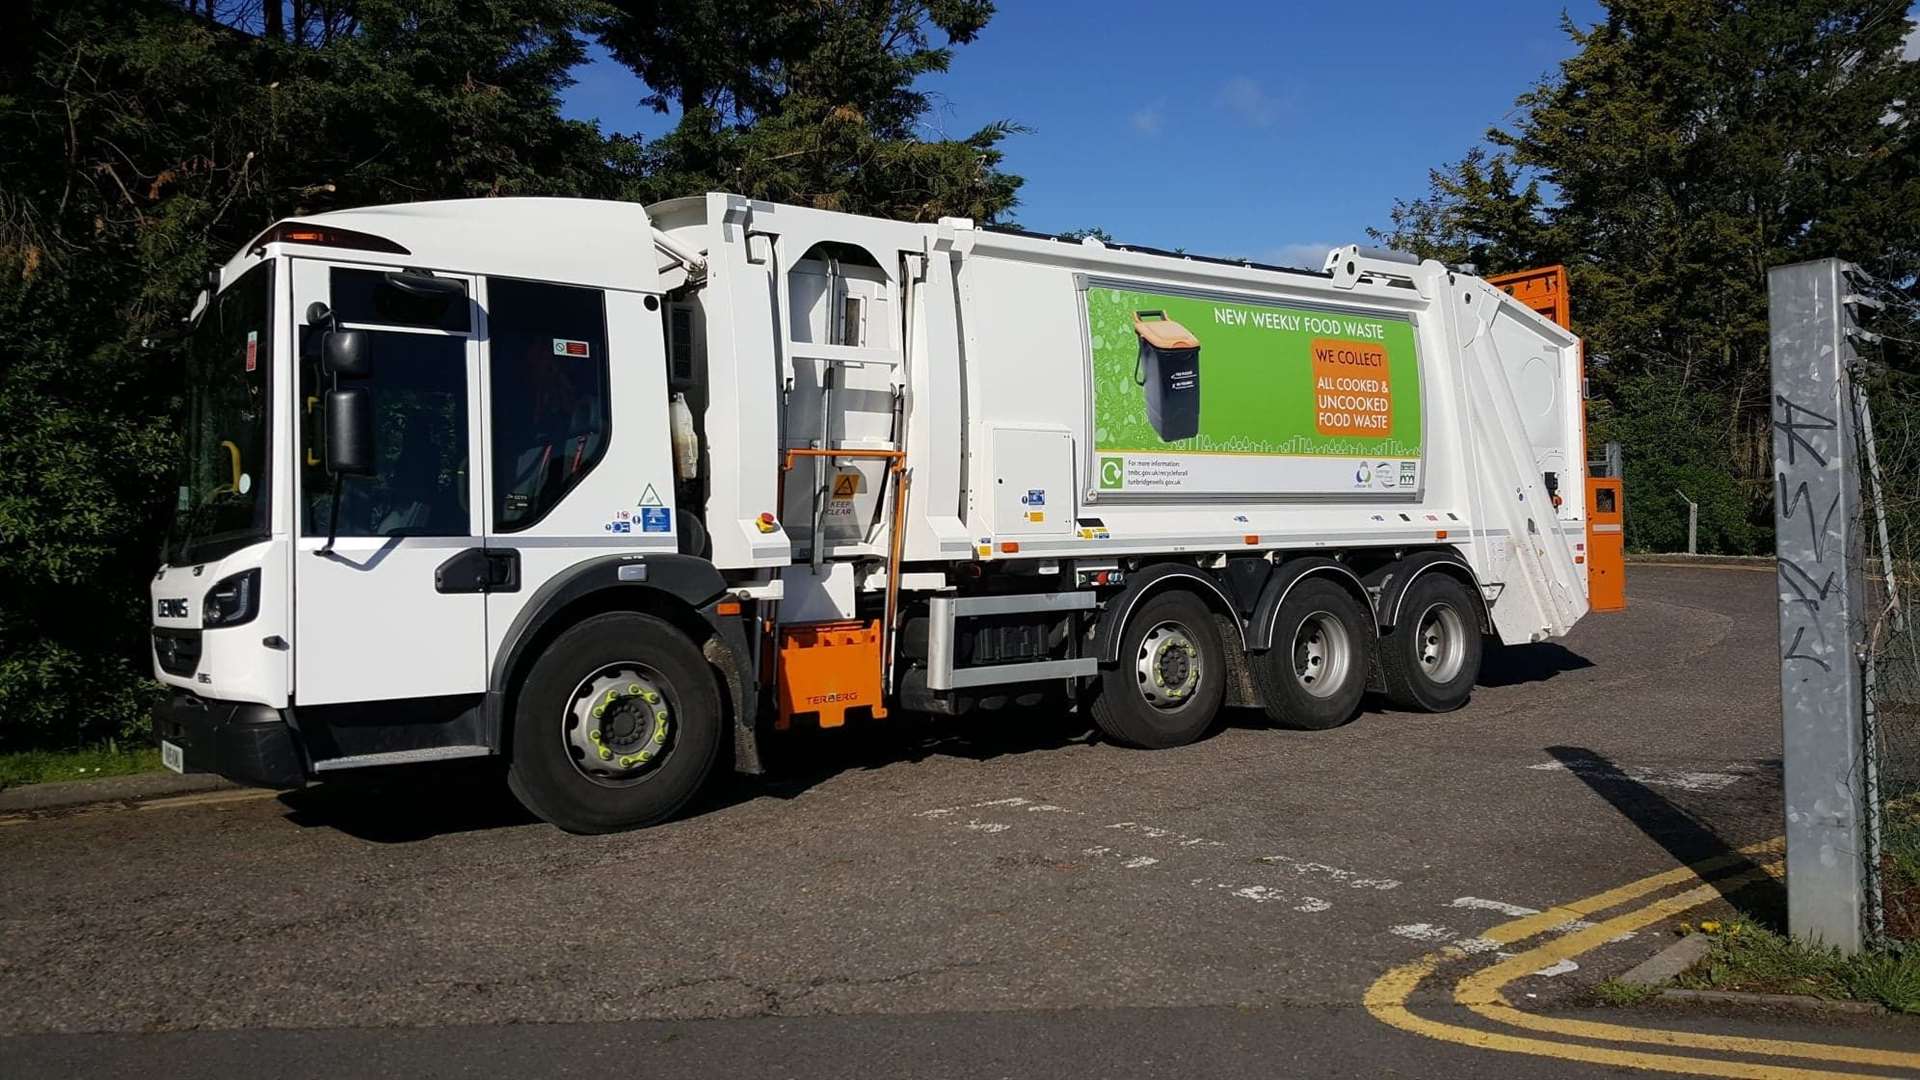 Urbaser is struggling to collect the household waste across both boroughs